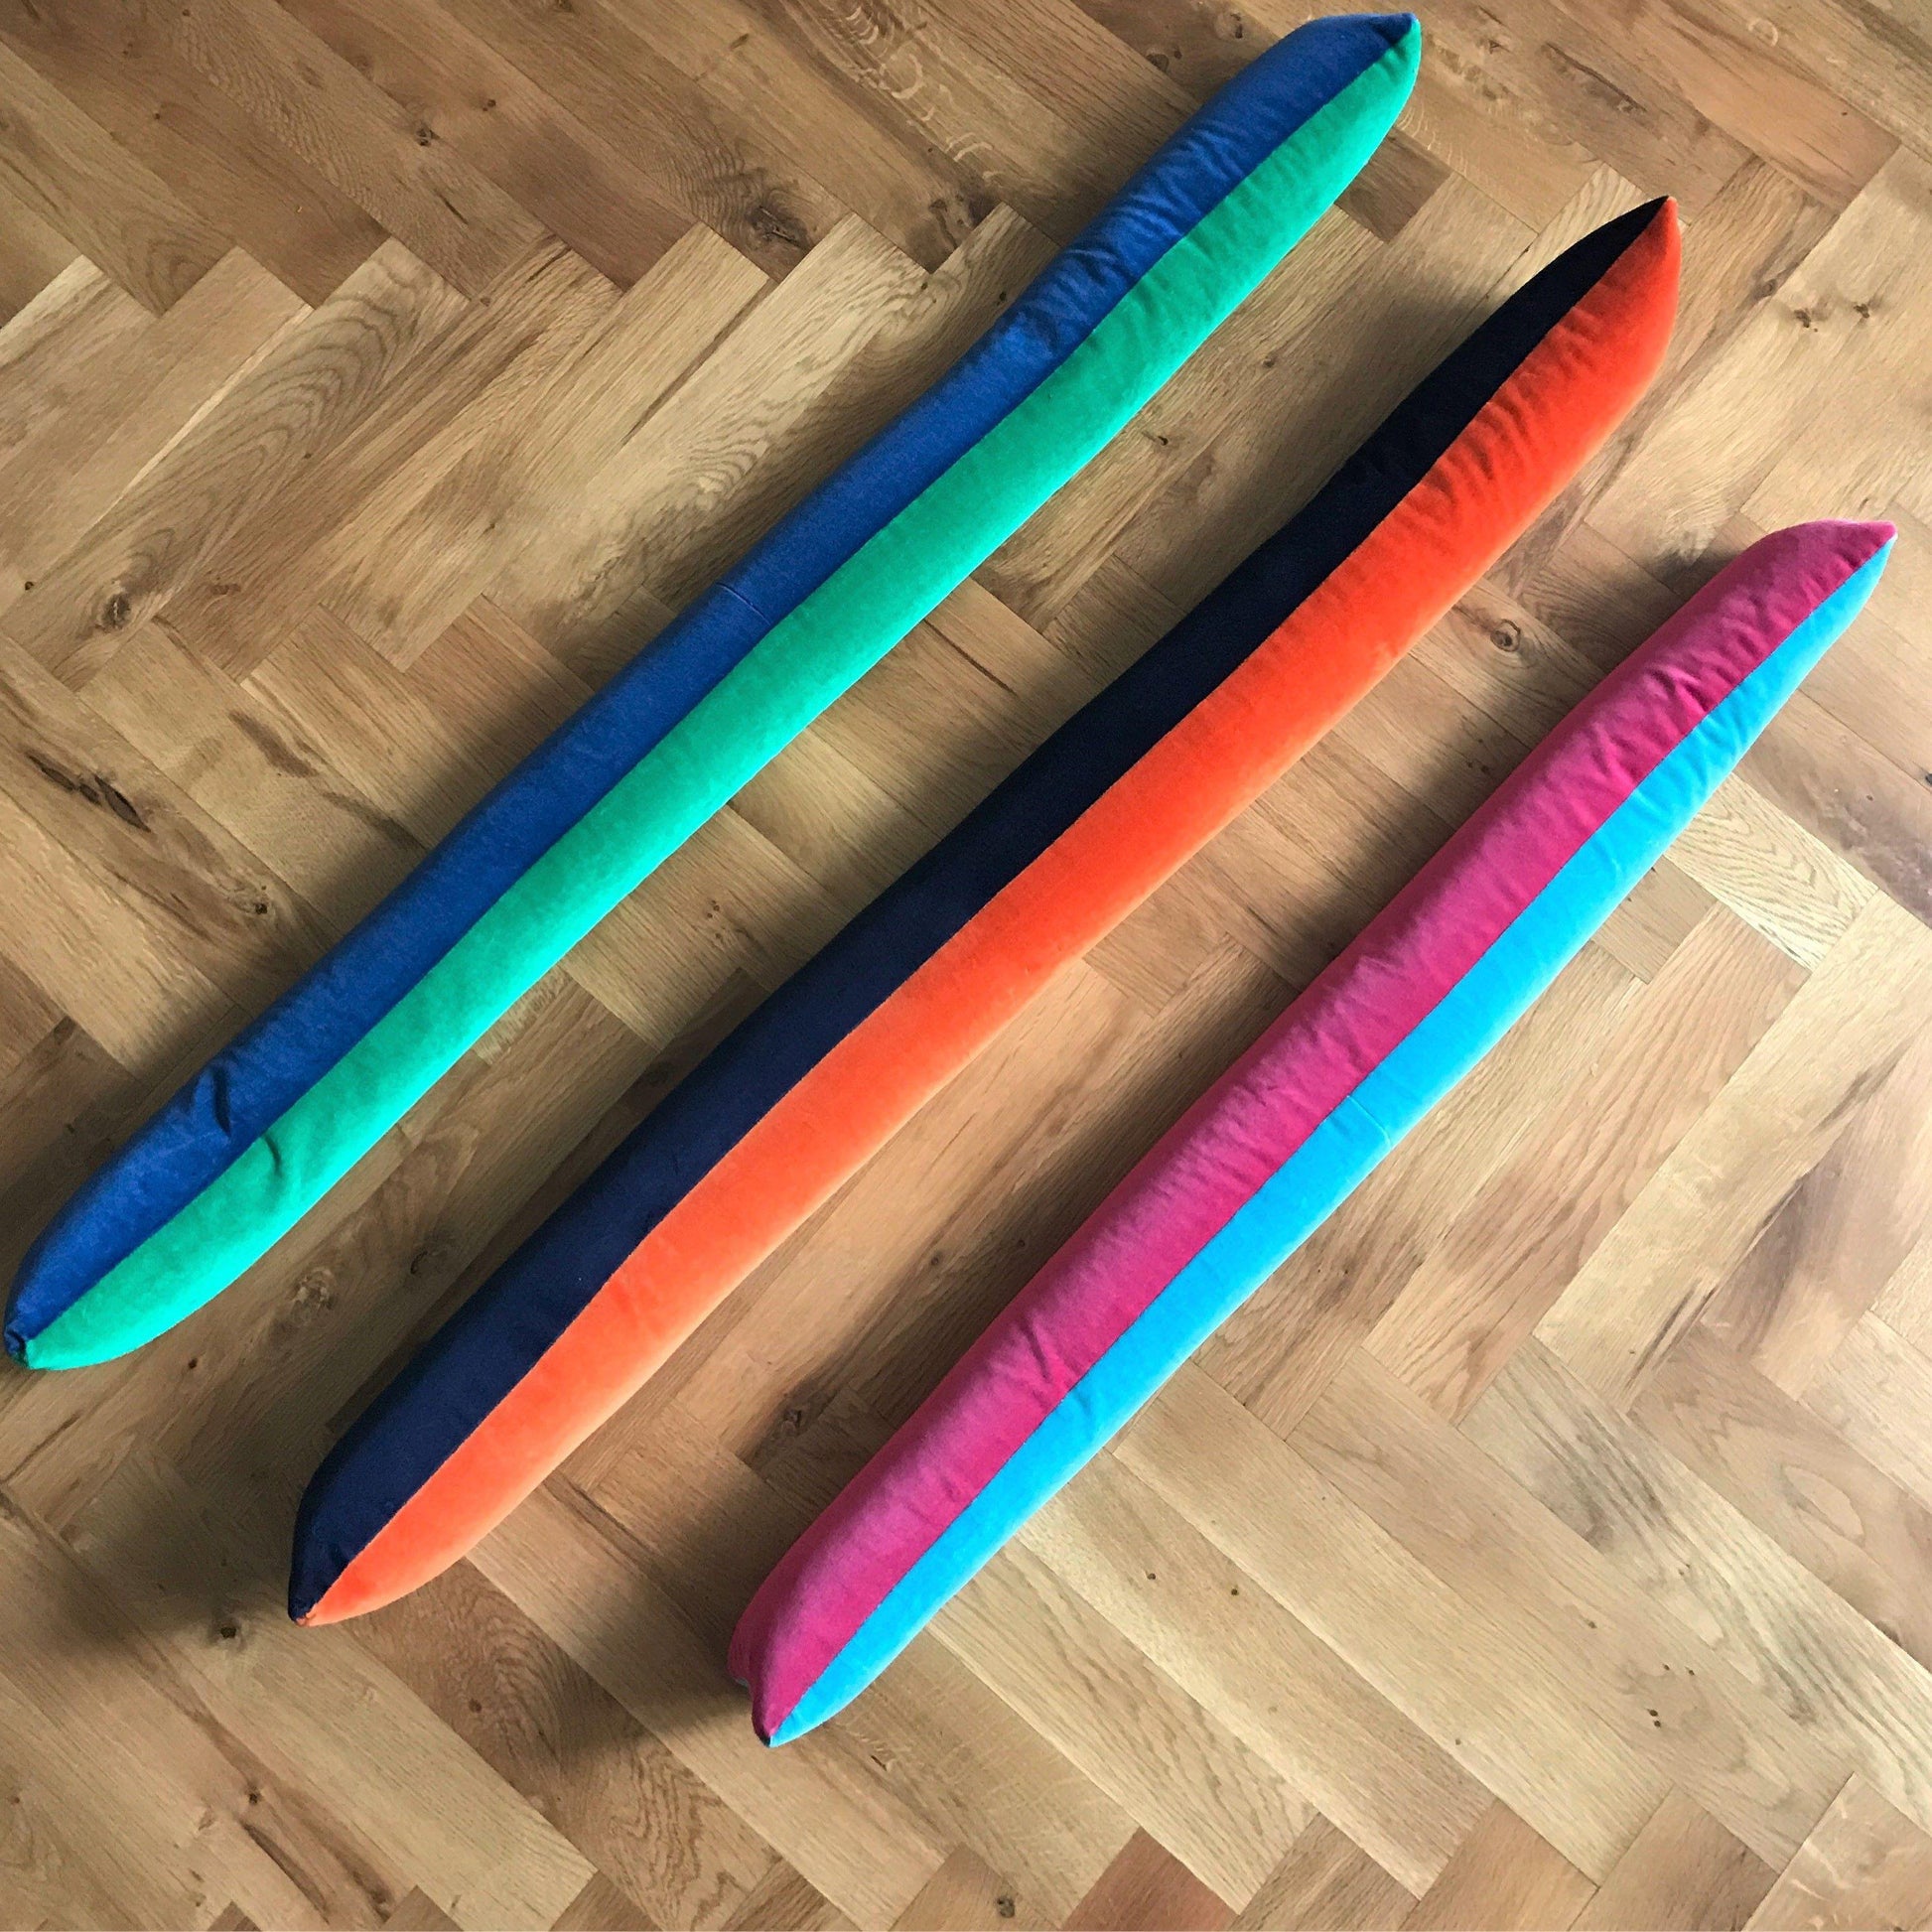 velvet draft excluders in bright pink, turquoise, orange, navy, green and royal blue